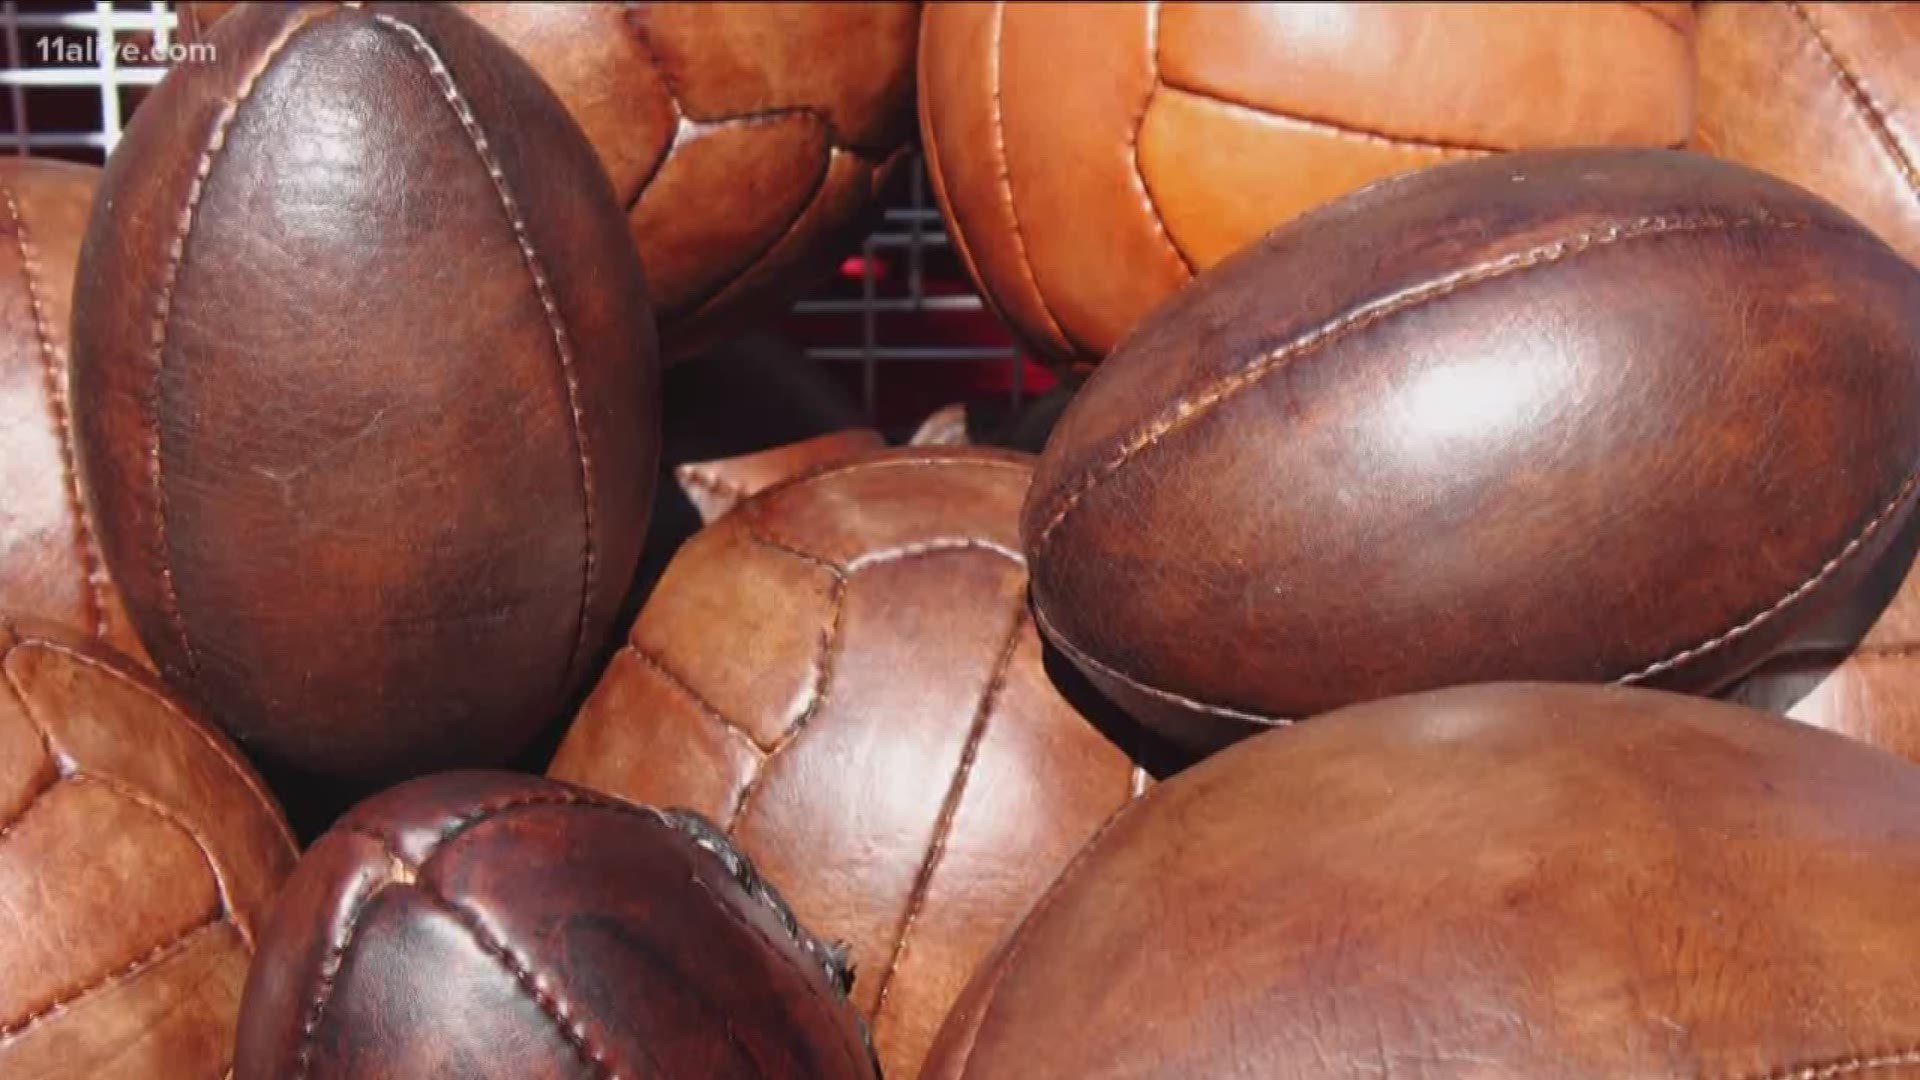 Our Why Guy explains how the football got its nickname.